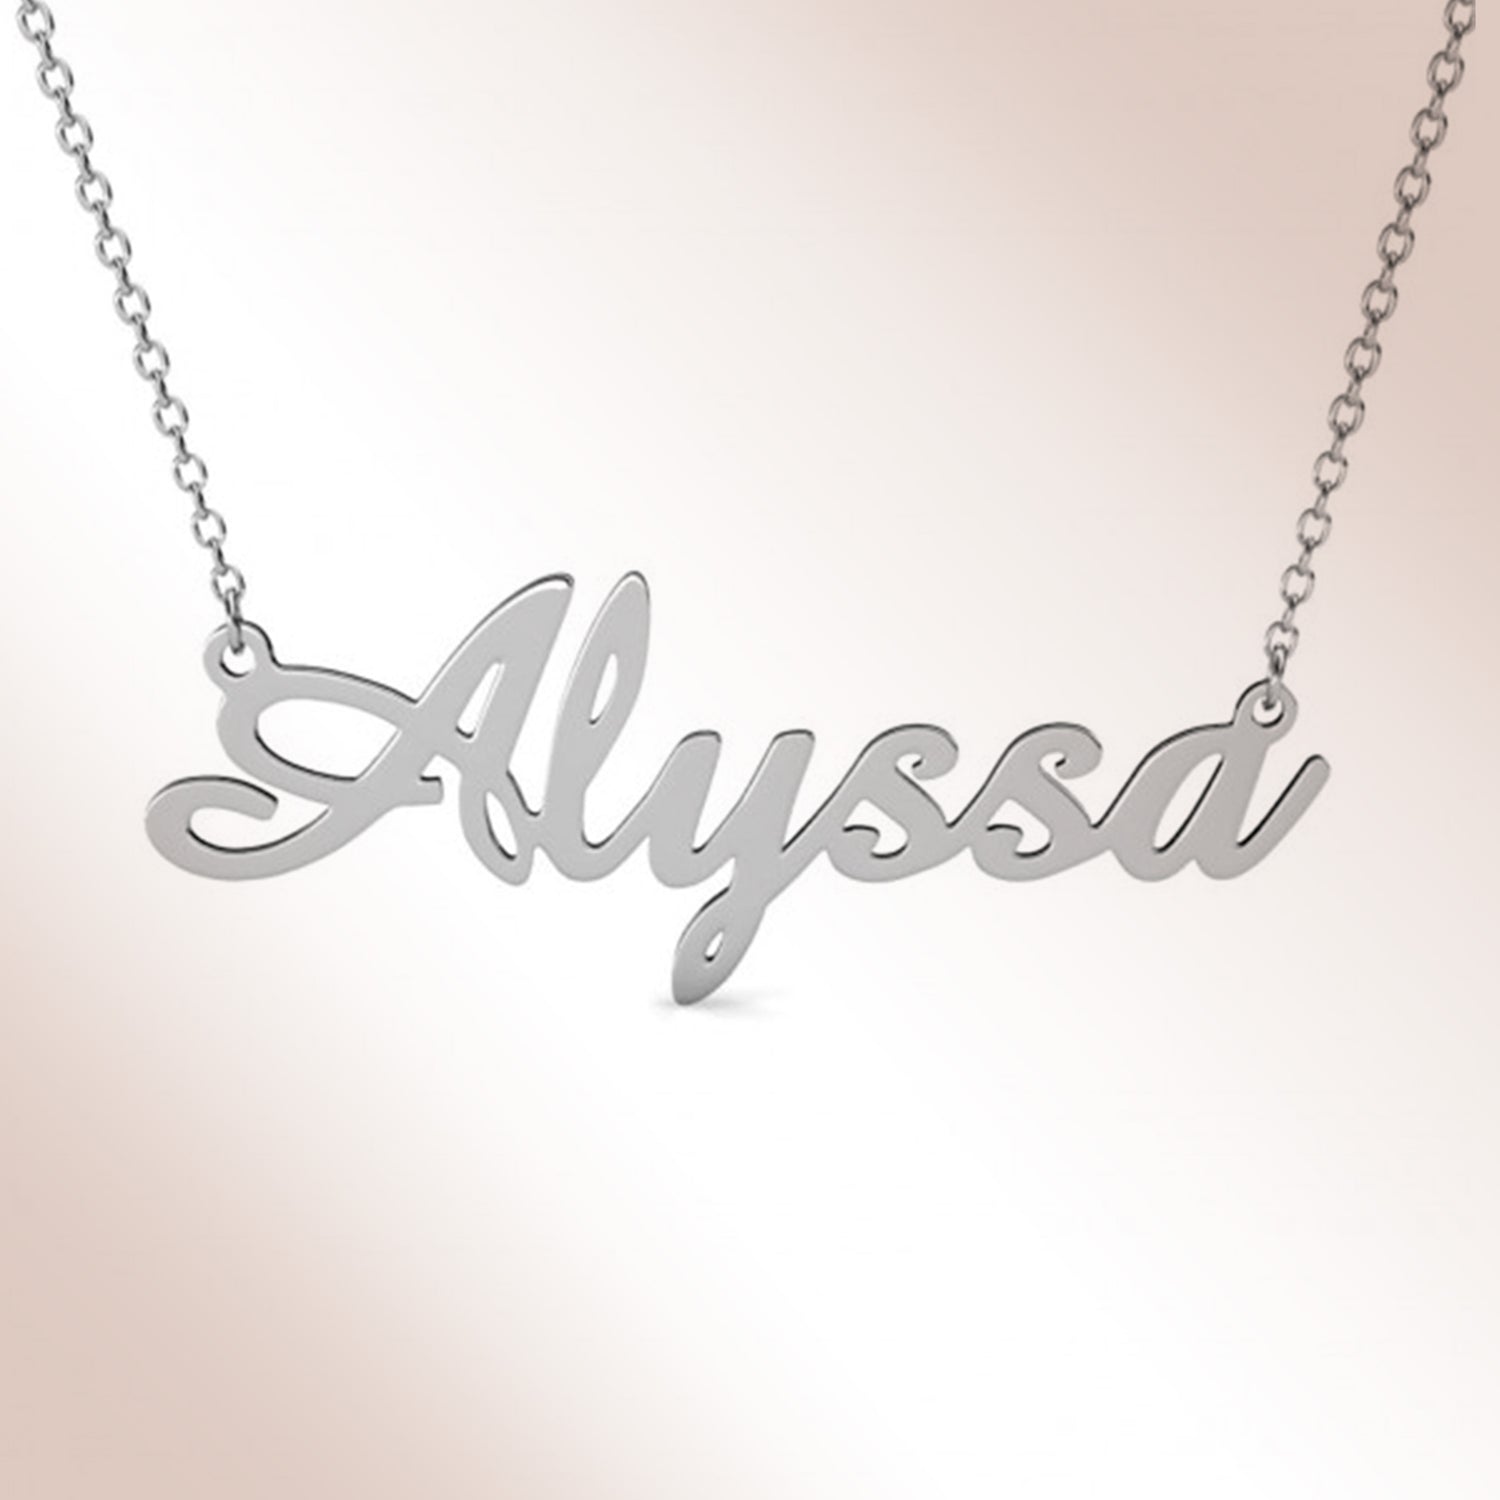 Custom name necklace for your friends, family members